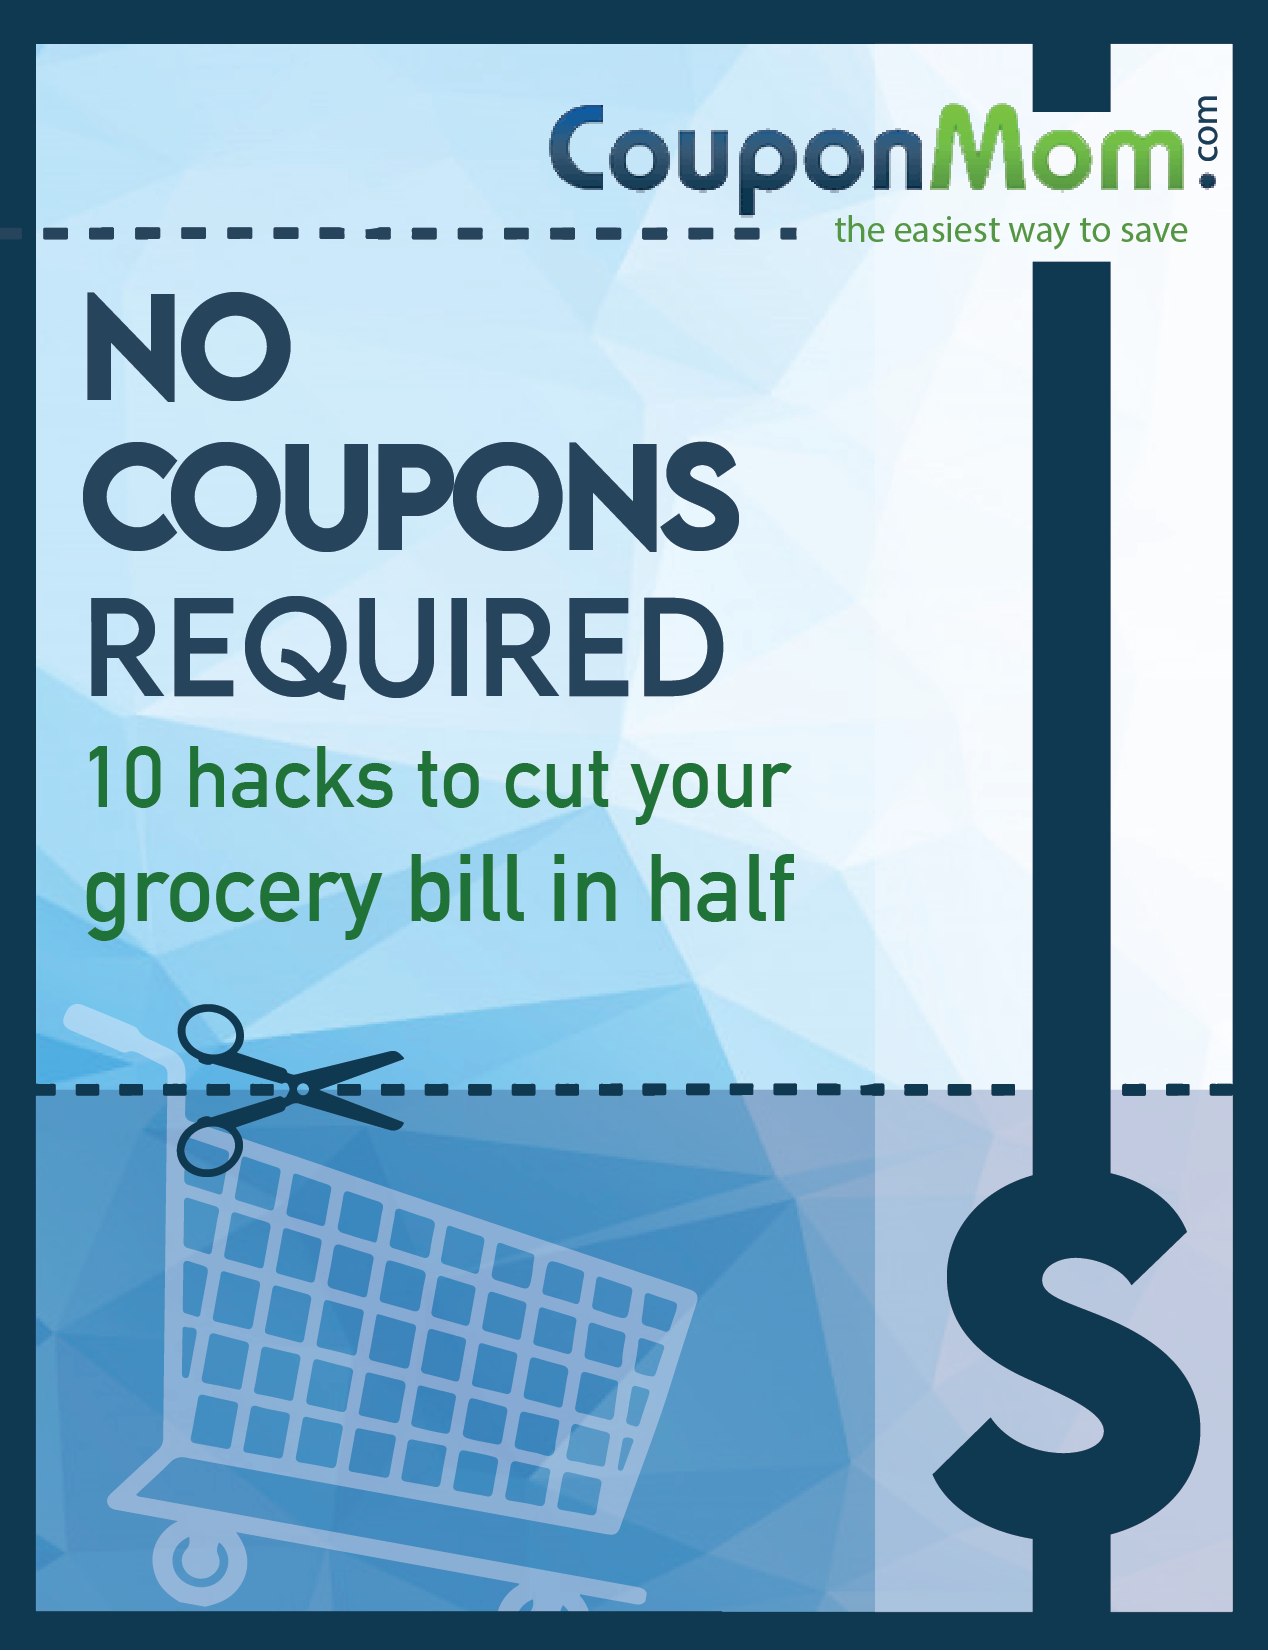 No Coupons Required - 10 hacks to cut your grocery bill in half | CouponMom